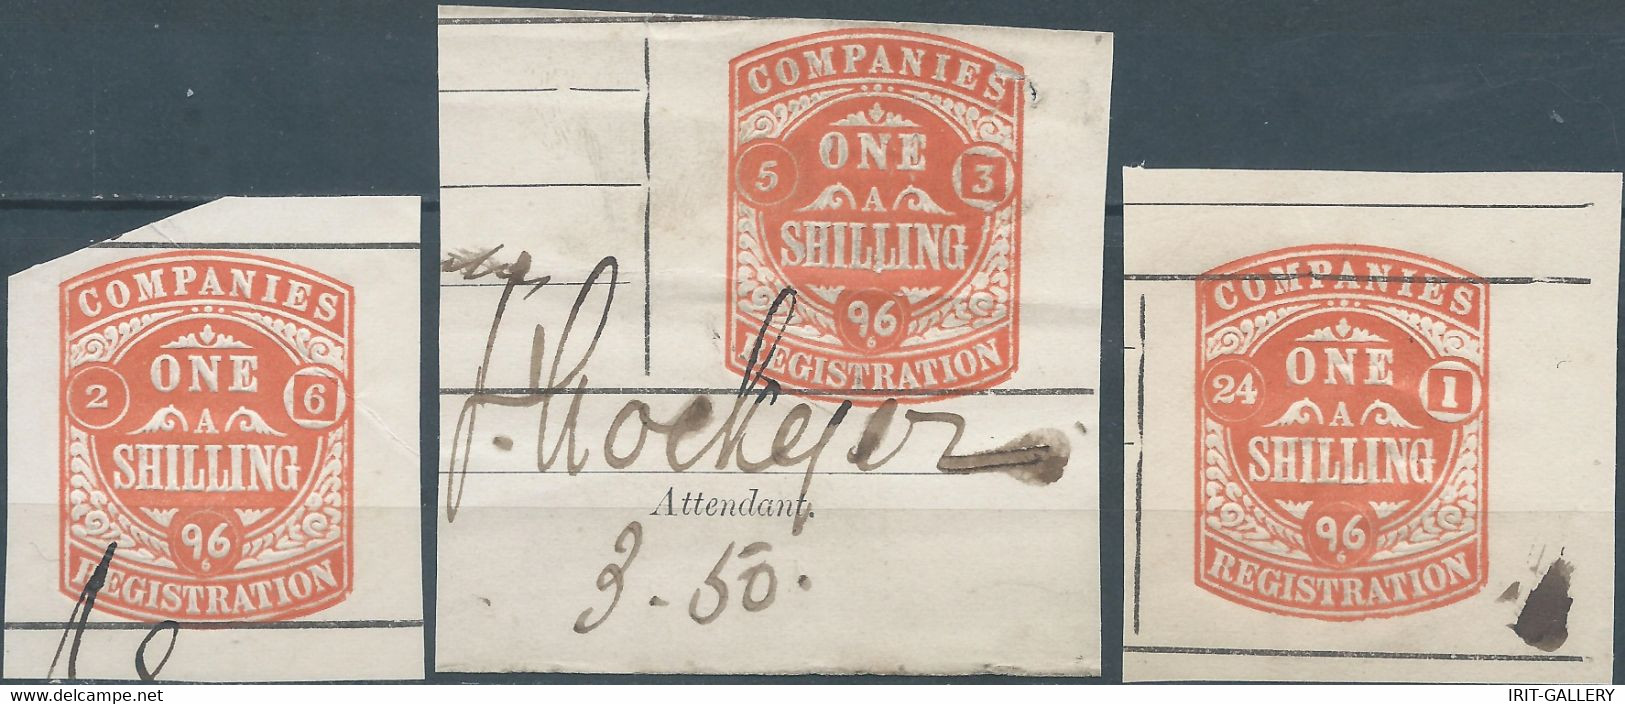 Great Britain-ENGLAND,1896 Tax Fee,COMPANIES REGISTRATION 1 SHILLING - Fiscale Zegels